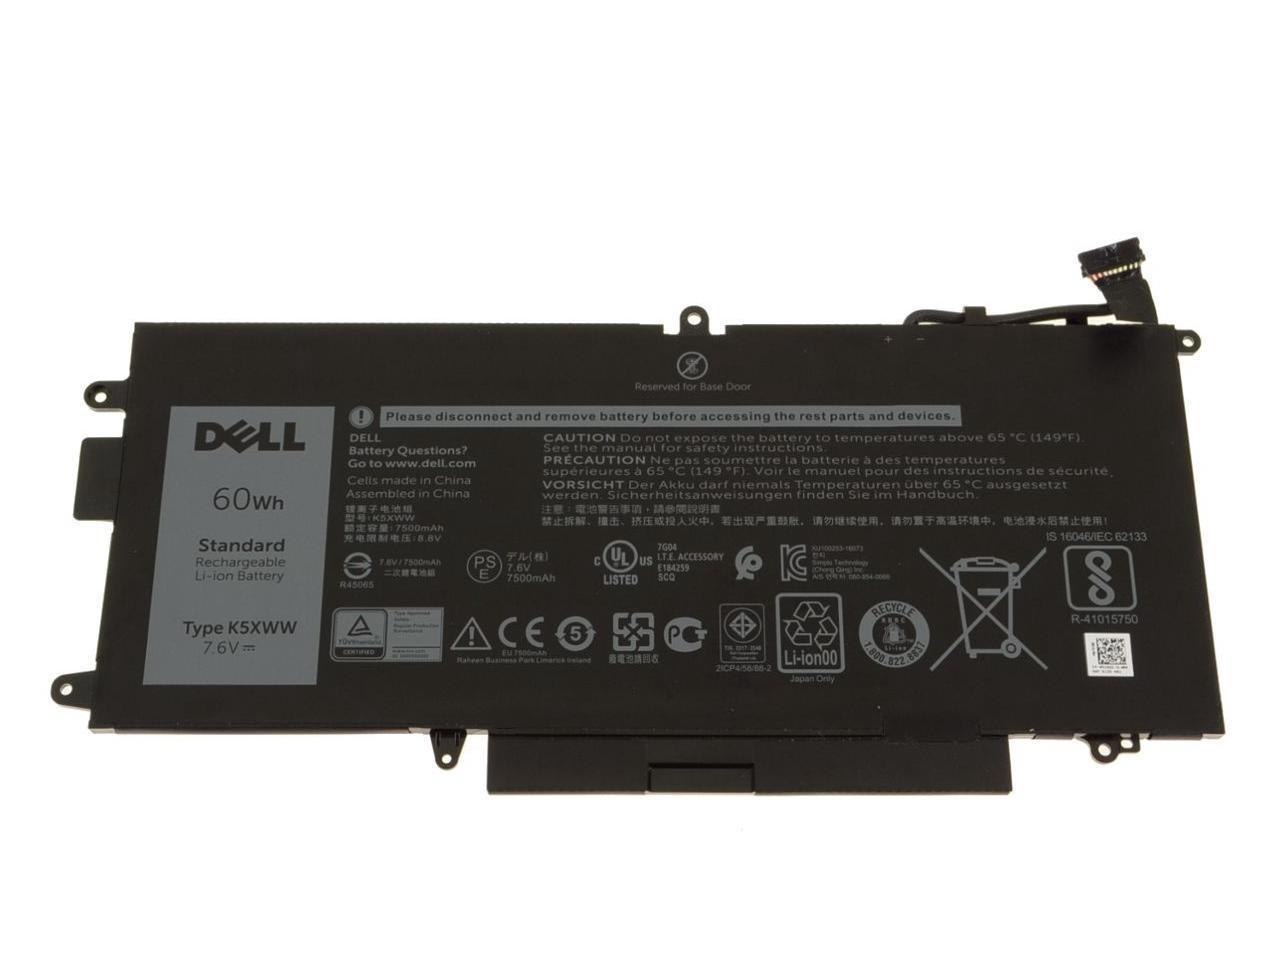 Dell-IMSourcing 4-Cell 60 Wh Lithium-Ion Replacement Battery For Select Laptops